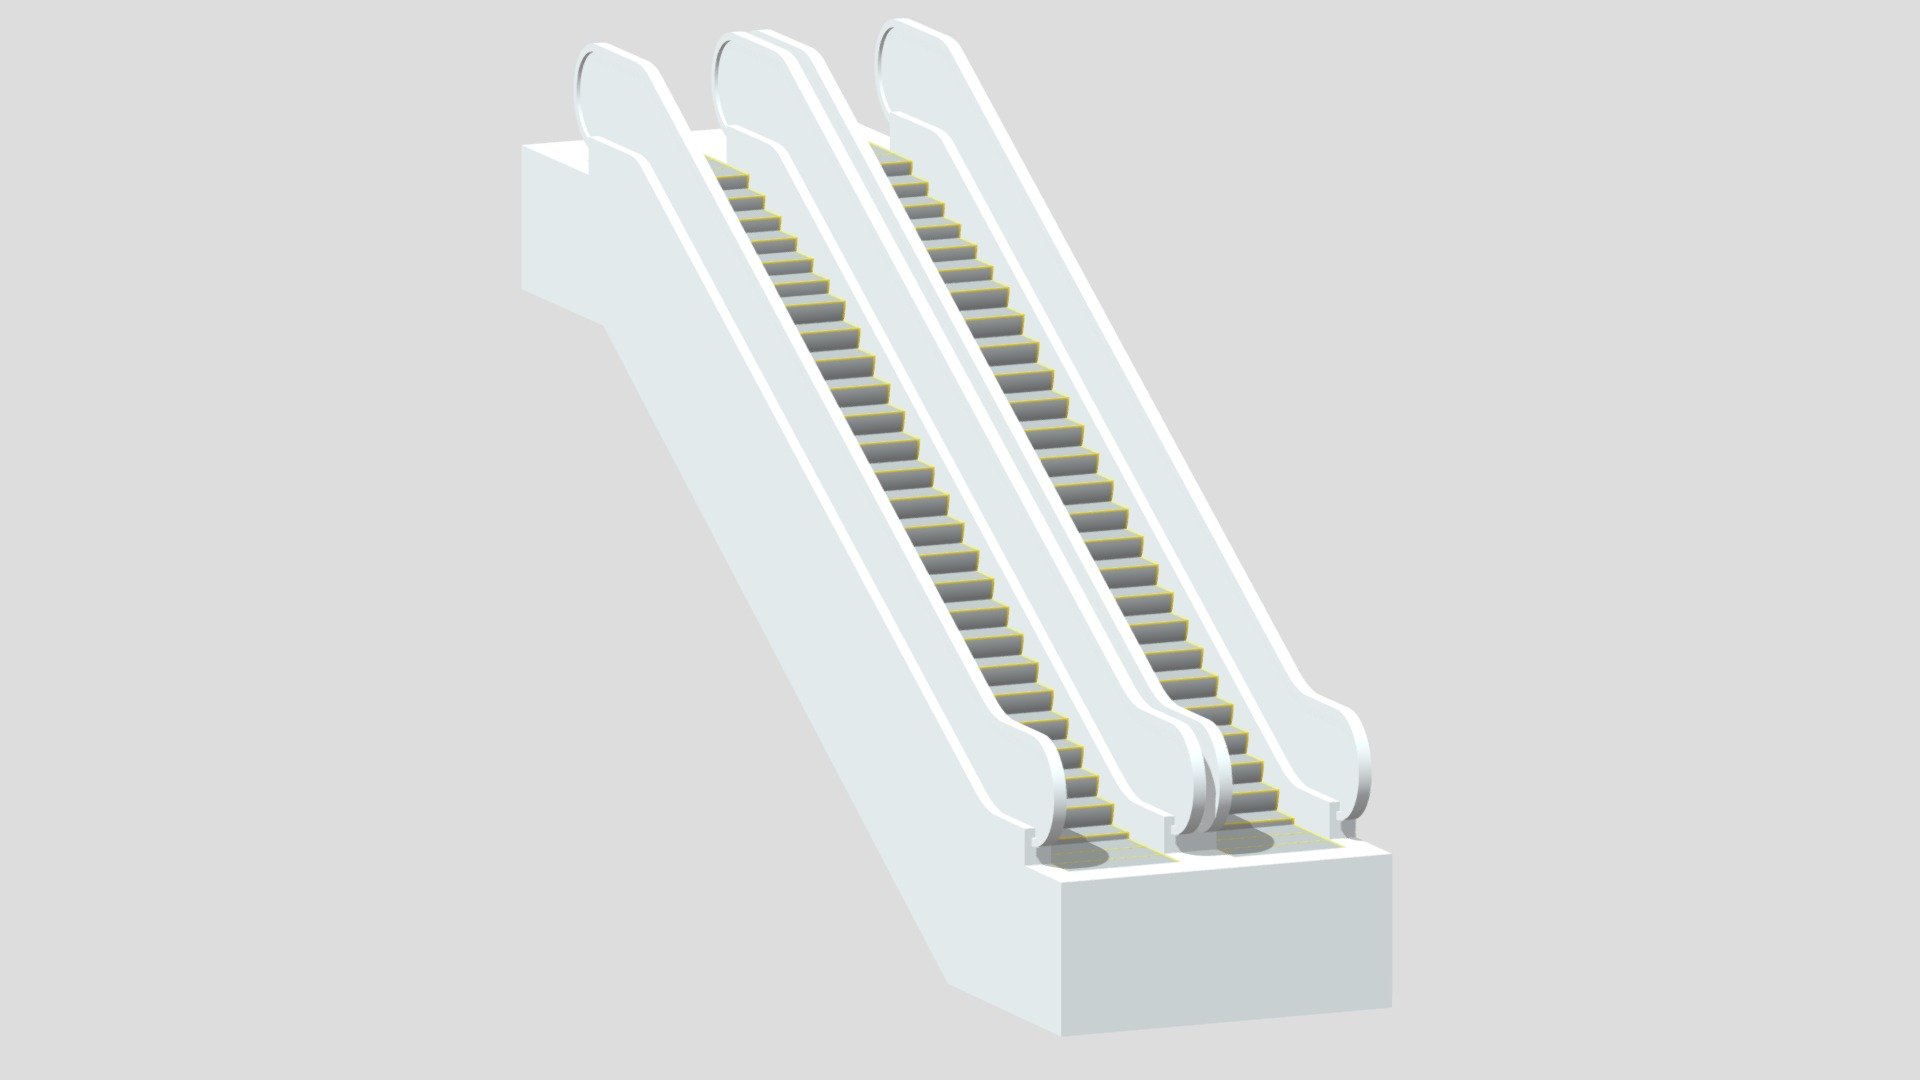 -Cartoon Escalator.

-This product contains 64 objects.

-Total vert: 6,184 poly: 5,022.

-Materials and objects have the correct names.

-This product was created in Blender 3.0.

-Formats: blend, fbx, obj, c4d, dae, abc, glb, stl, unity.

-We hope you enjoy this model.

-Thank you 3d model